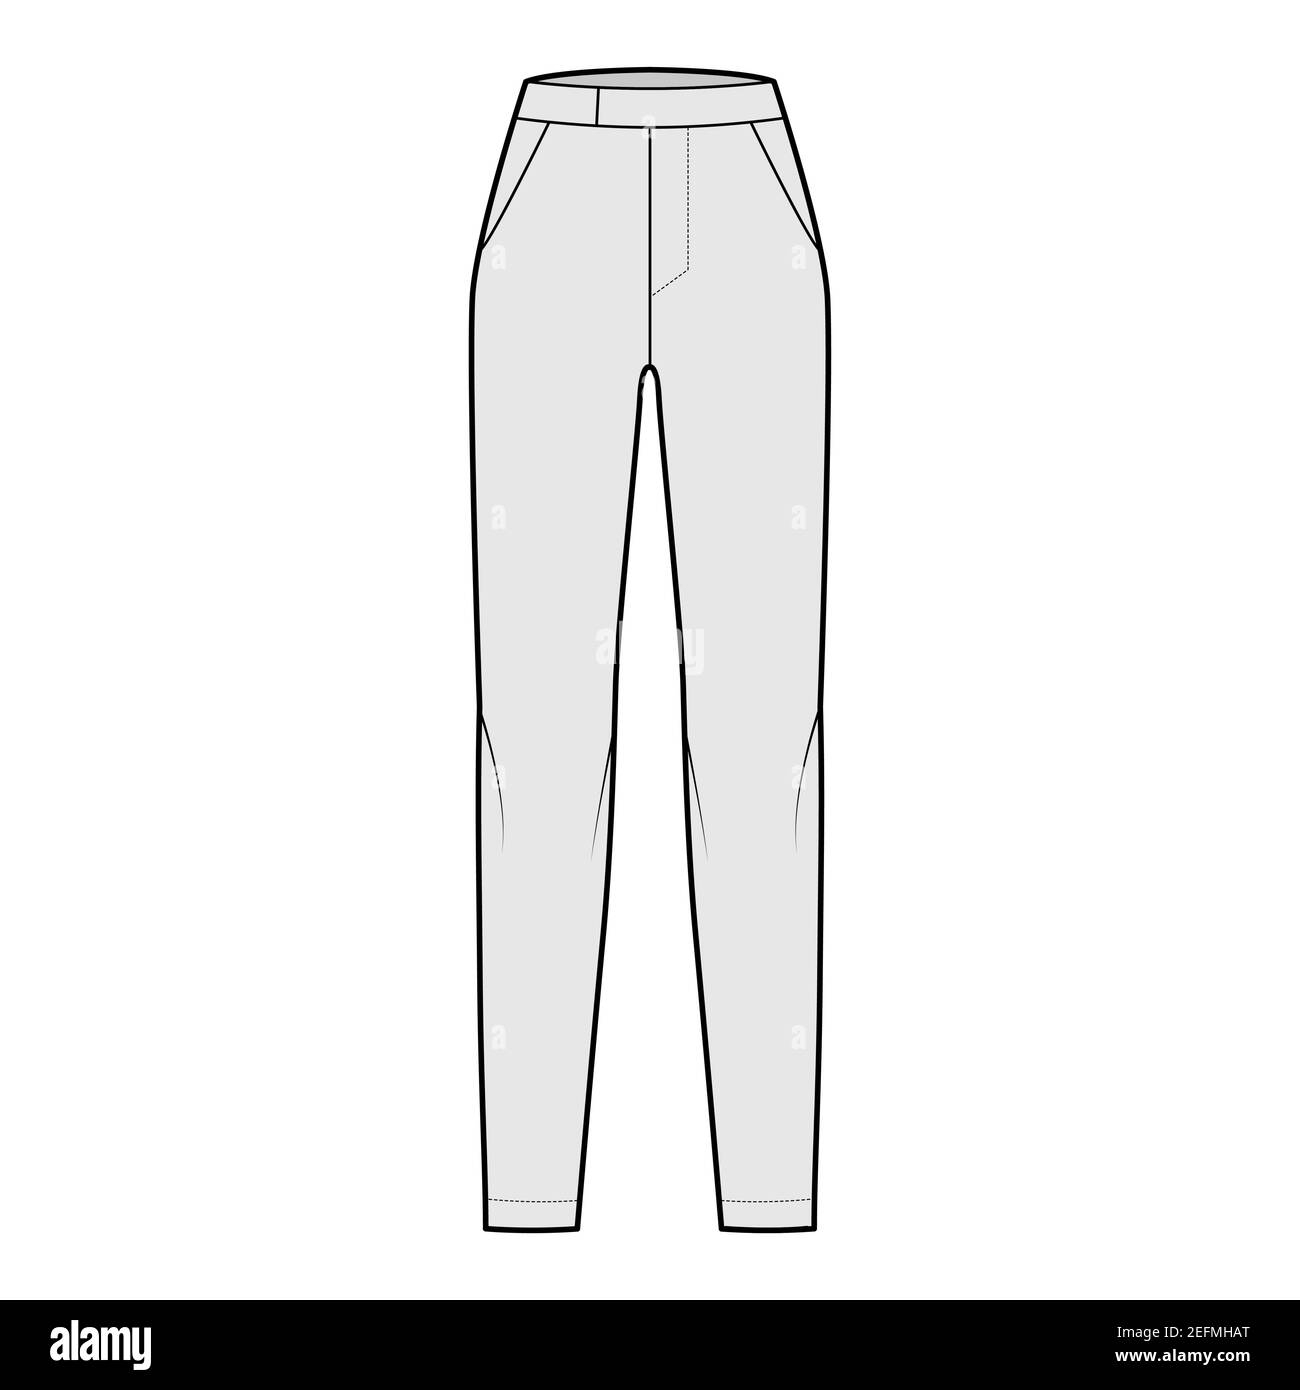 Pants cigarette technical fashion illustration with extended normal low  waist, high rise, full length, slant slashed pockets. Flat trousers apparel  template front back grey color. Women men CAD mockup Stock Vector Image